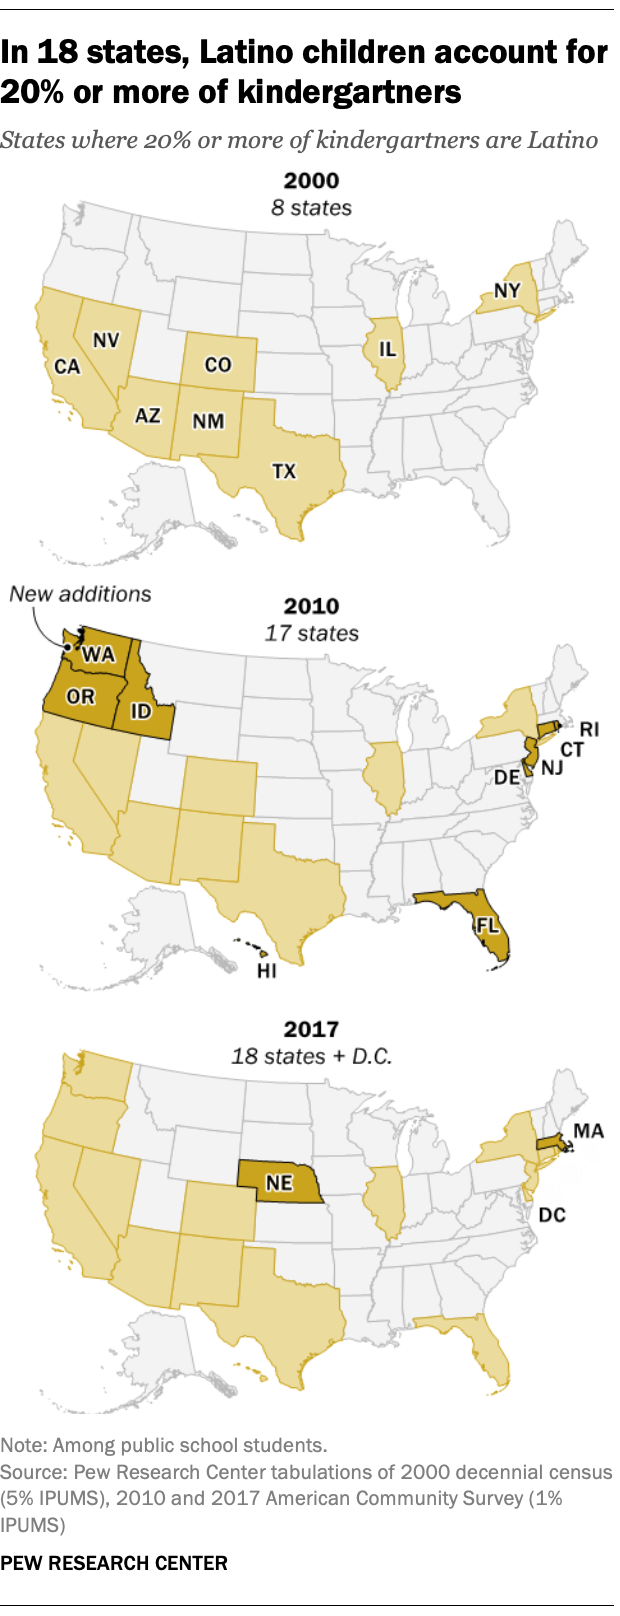 In 18 states, Latino children account for 20% or more of kindergartners